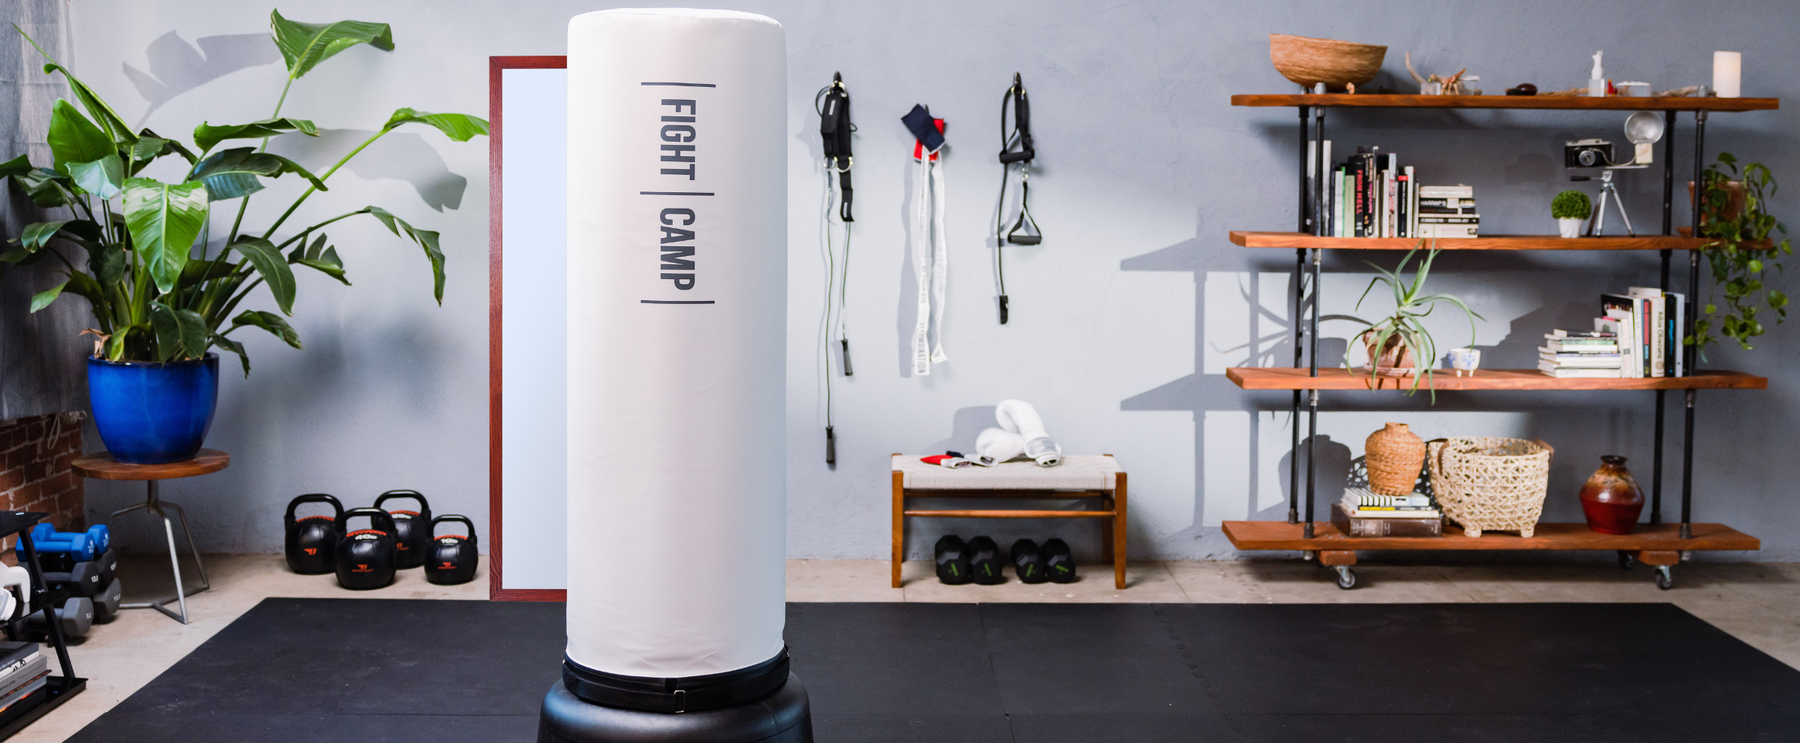 FightCamp - How To Organize Your Home Gym & Workout Equipment